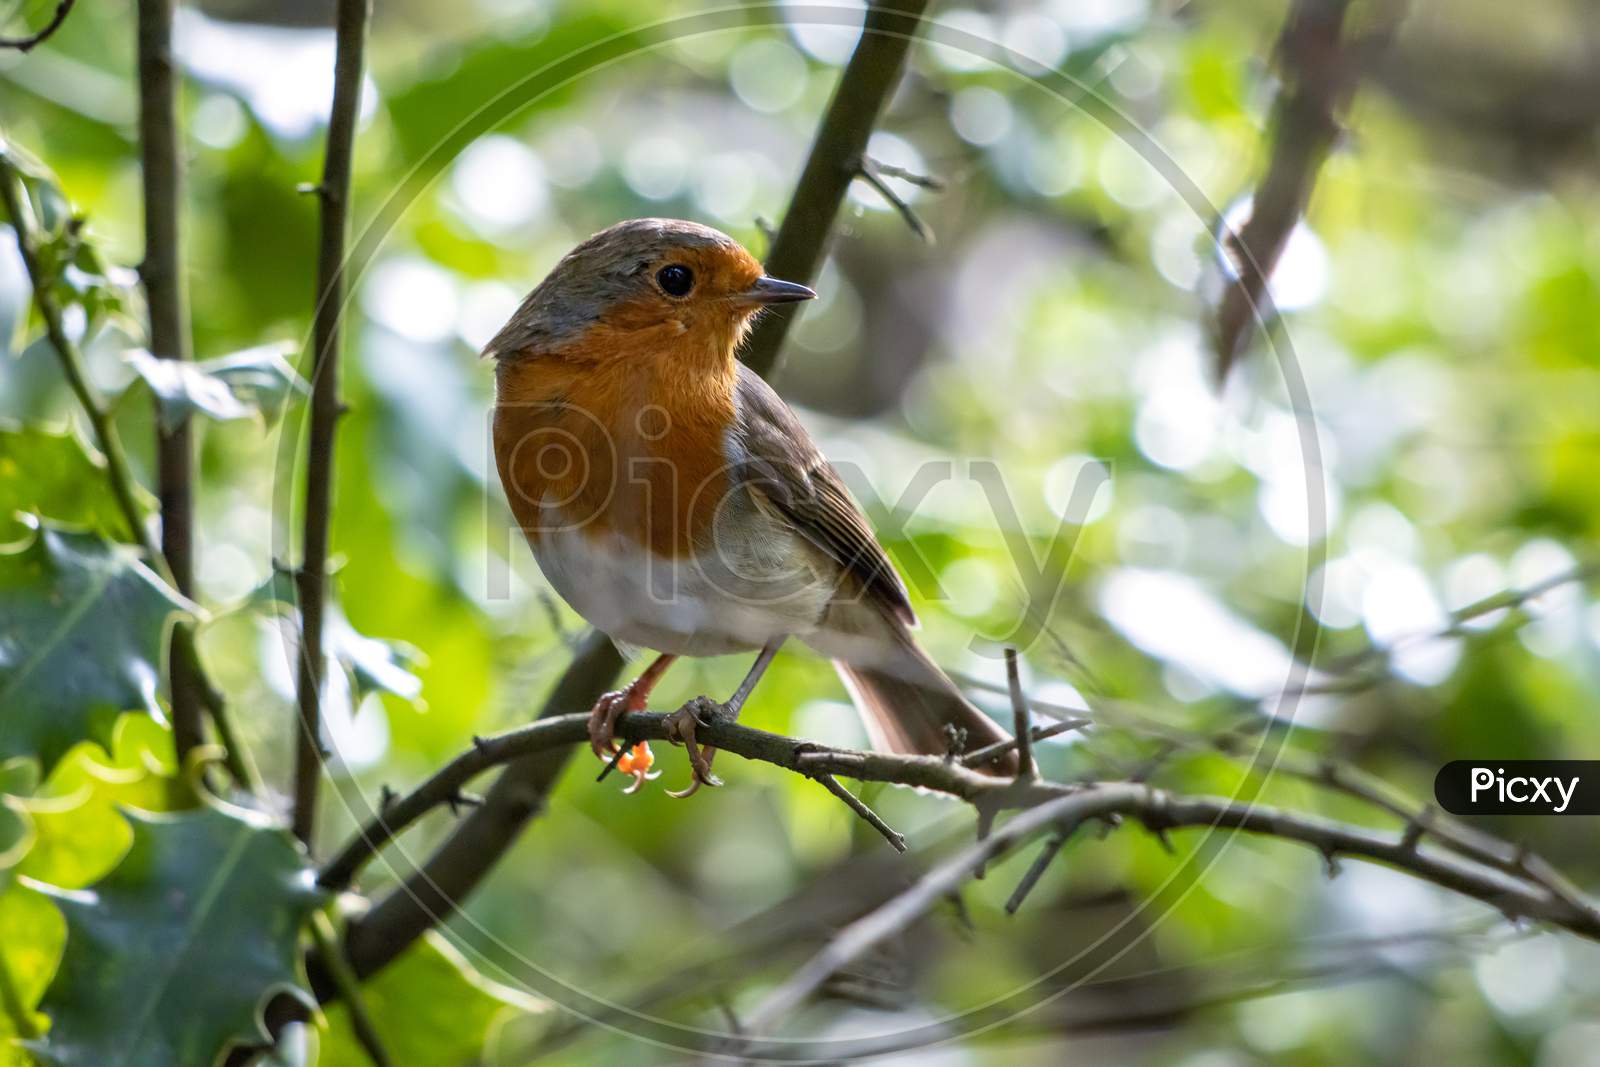 Robin Looking Alert In A Tree On A Summer Day